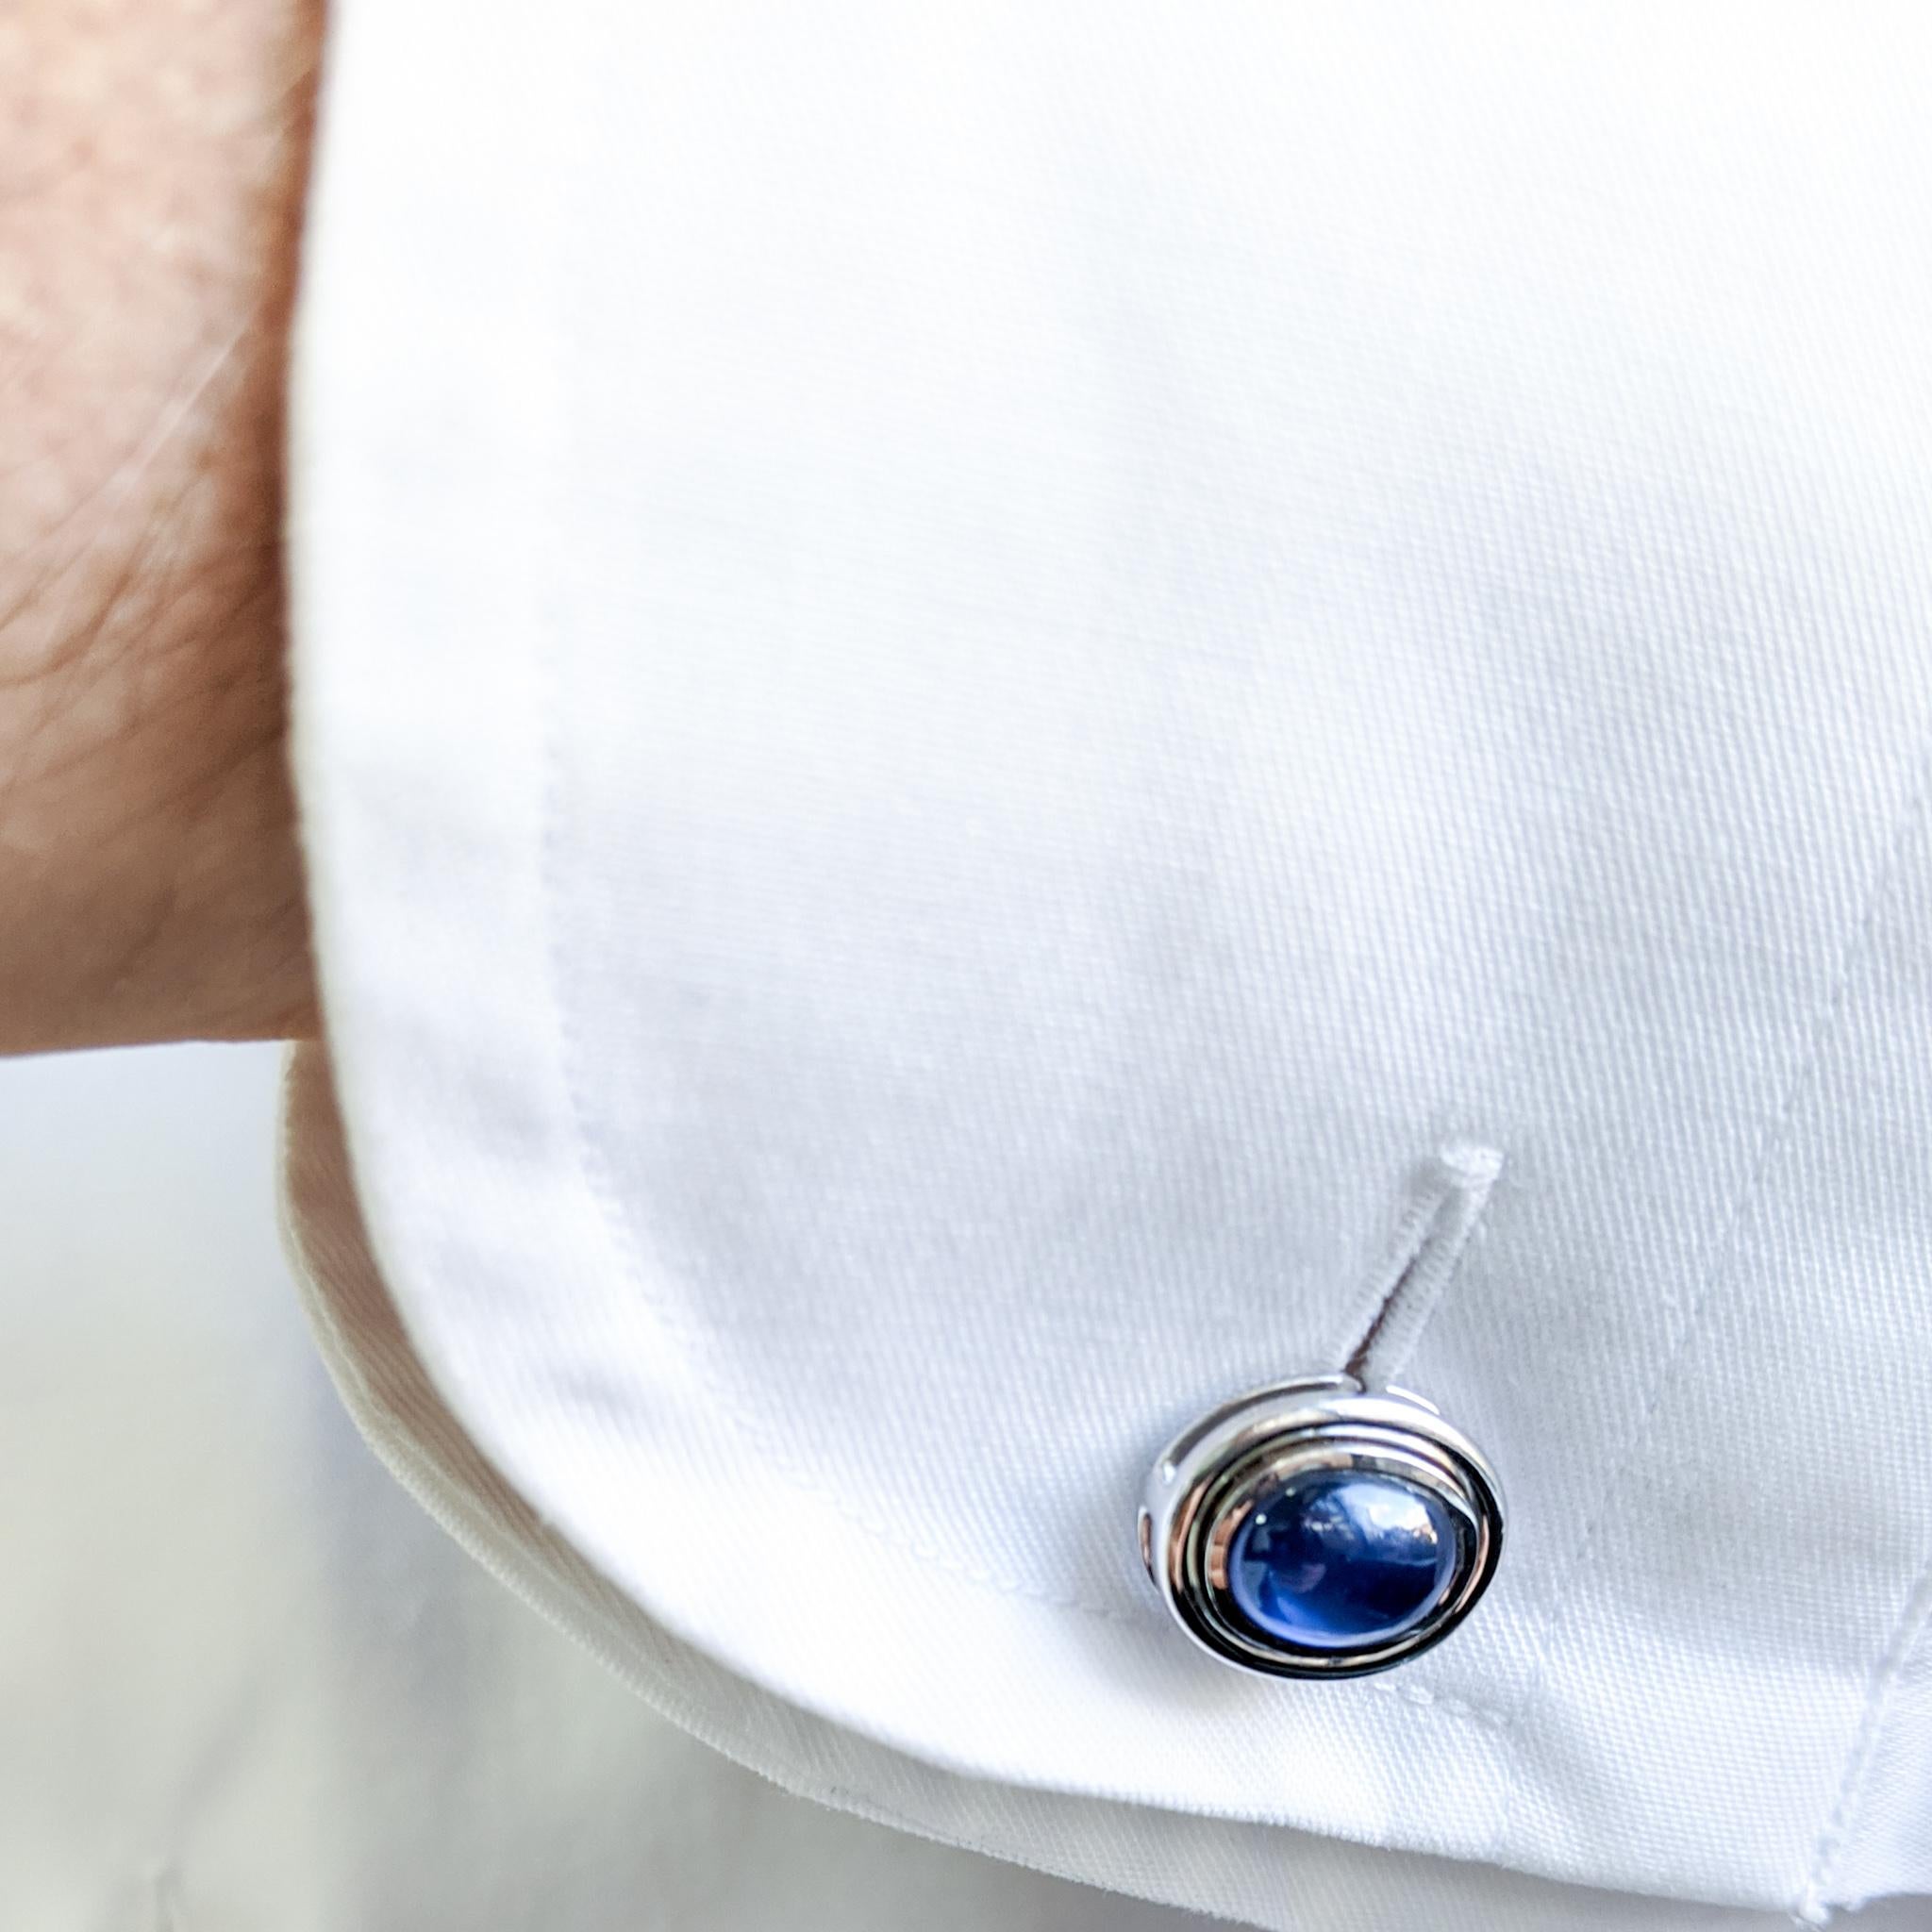 The epitome of subtle elegance, these cabochon gemstone cufflinks and studs set are the perfect piece for special occasions. The cufflinks can be worn throughout the day, and the studs are the ideal complement to any tuxedo shirt.  
And of course